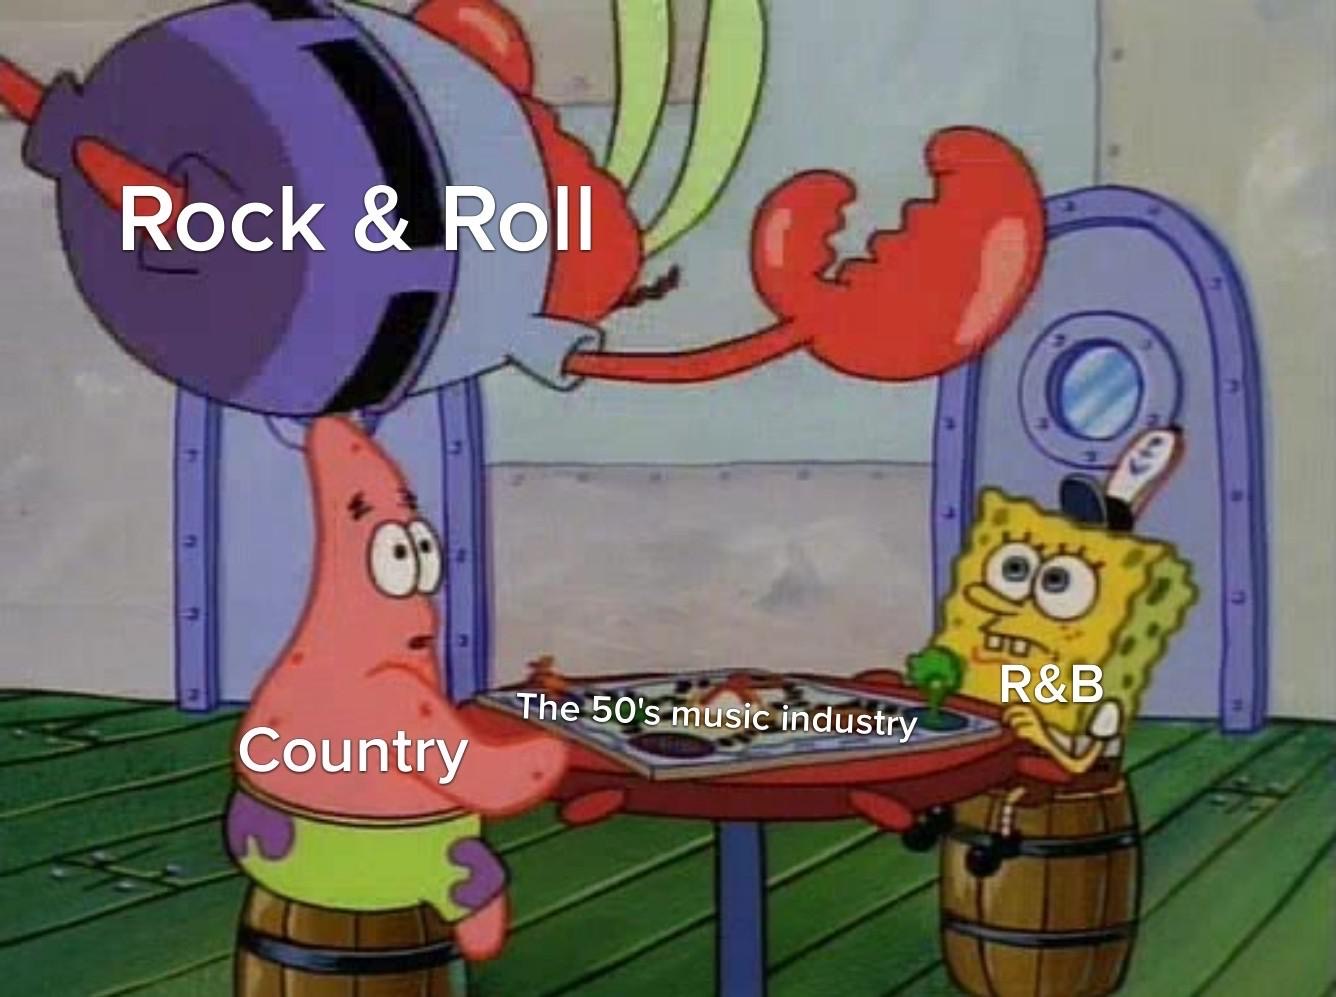 mr krabs jumping on table meme template - Rock & Roll R&B The 50's music industry Country